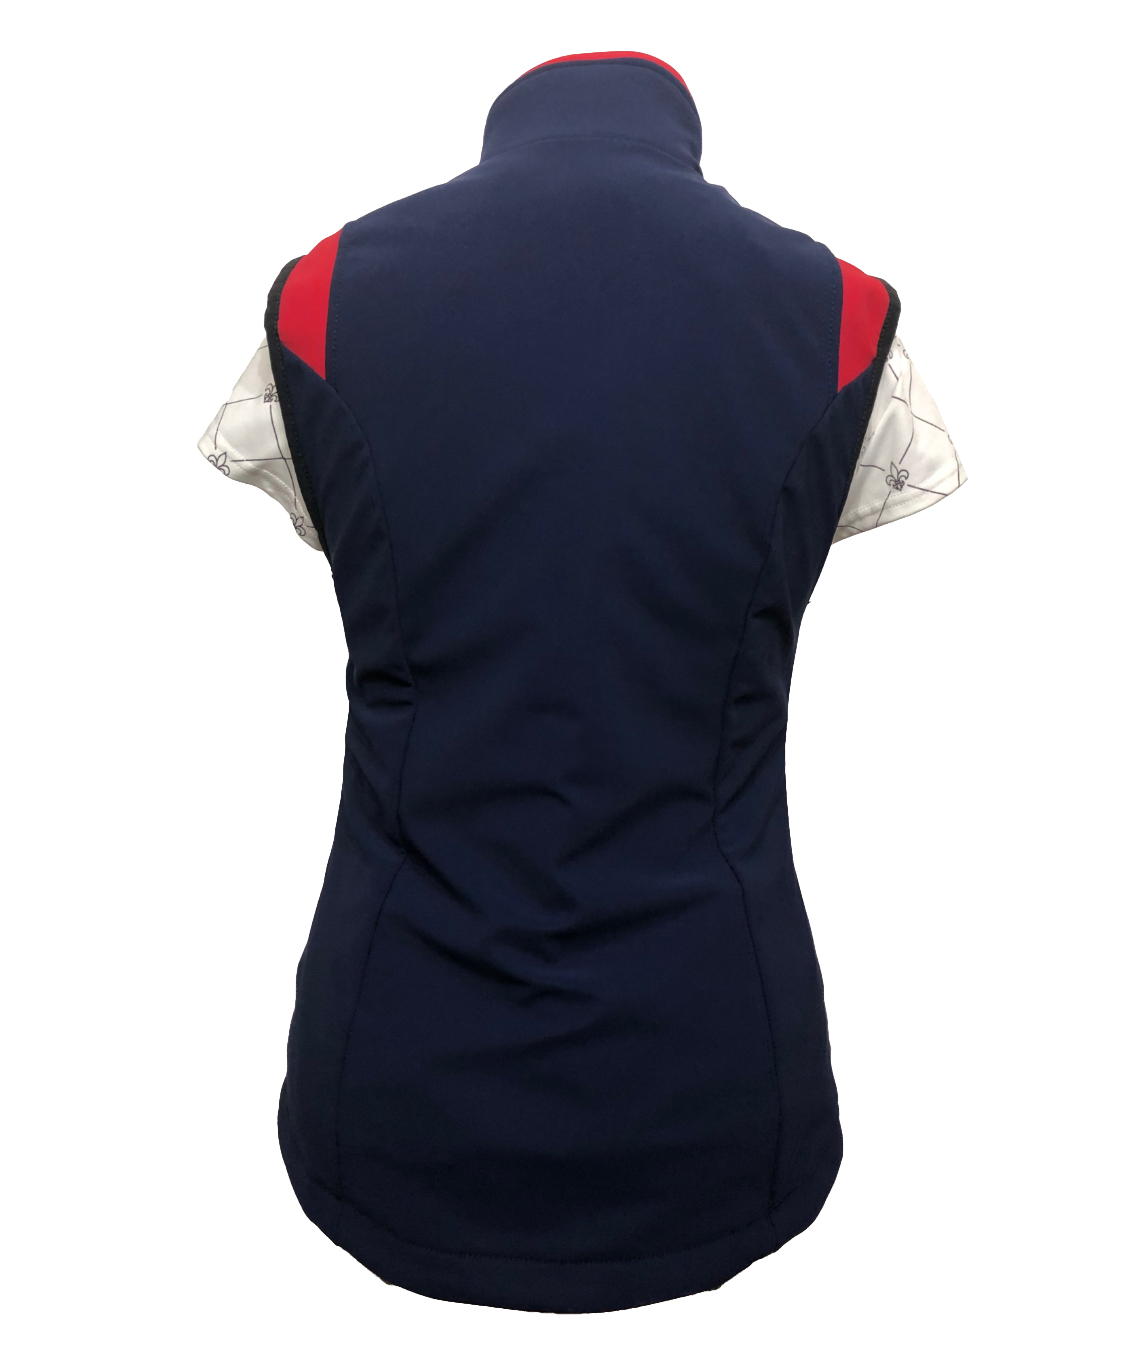 Refurbished Zip In 1 With Airshell vest outer in blue and red small rear